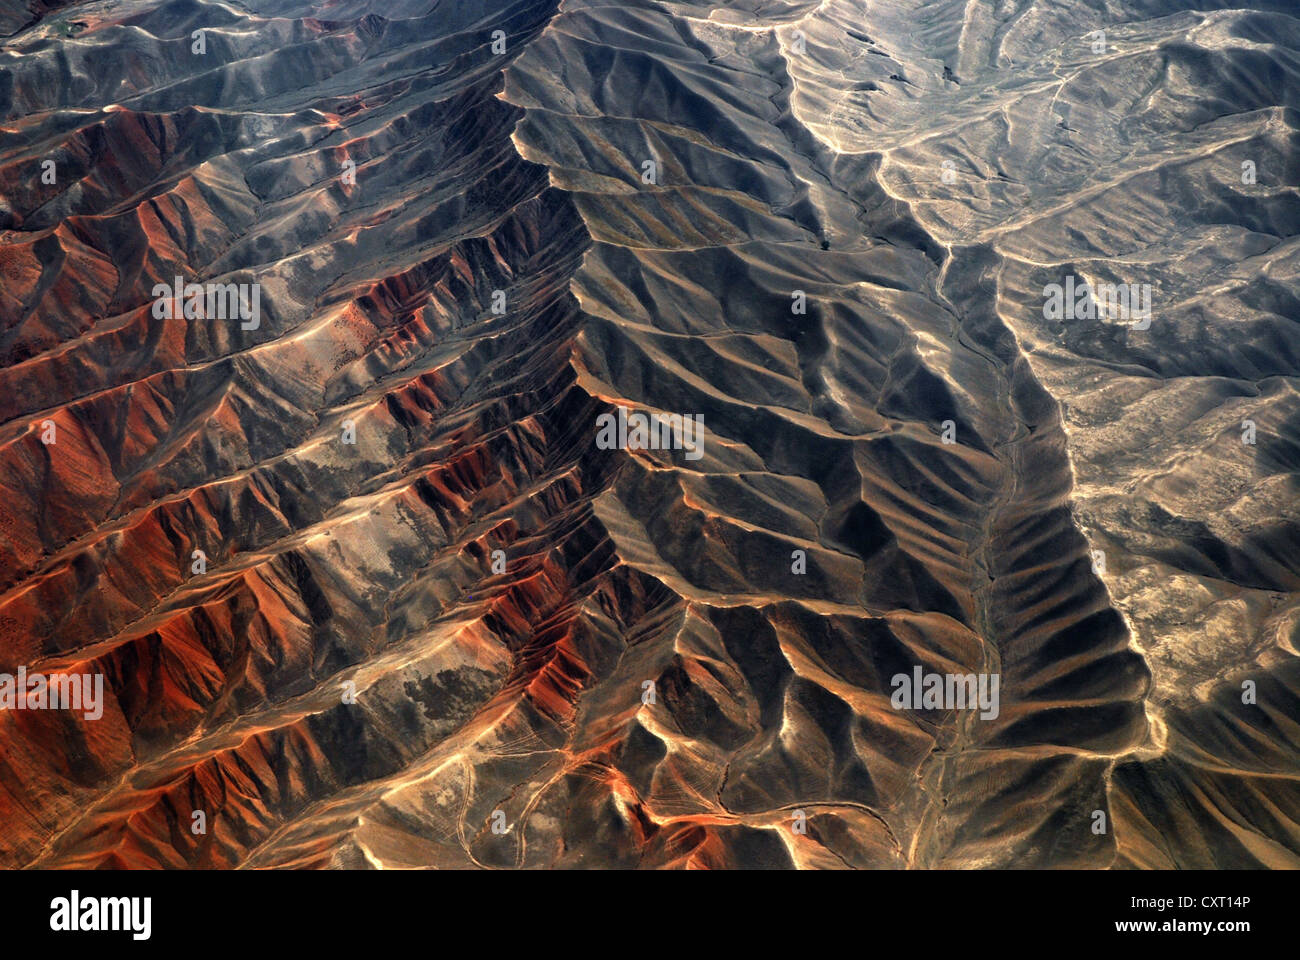 Earth, ridge, surface, bird's-eye view, texture, land lines, deserts, ravines, aerial photography, shading, map Stock Photo